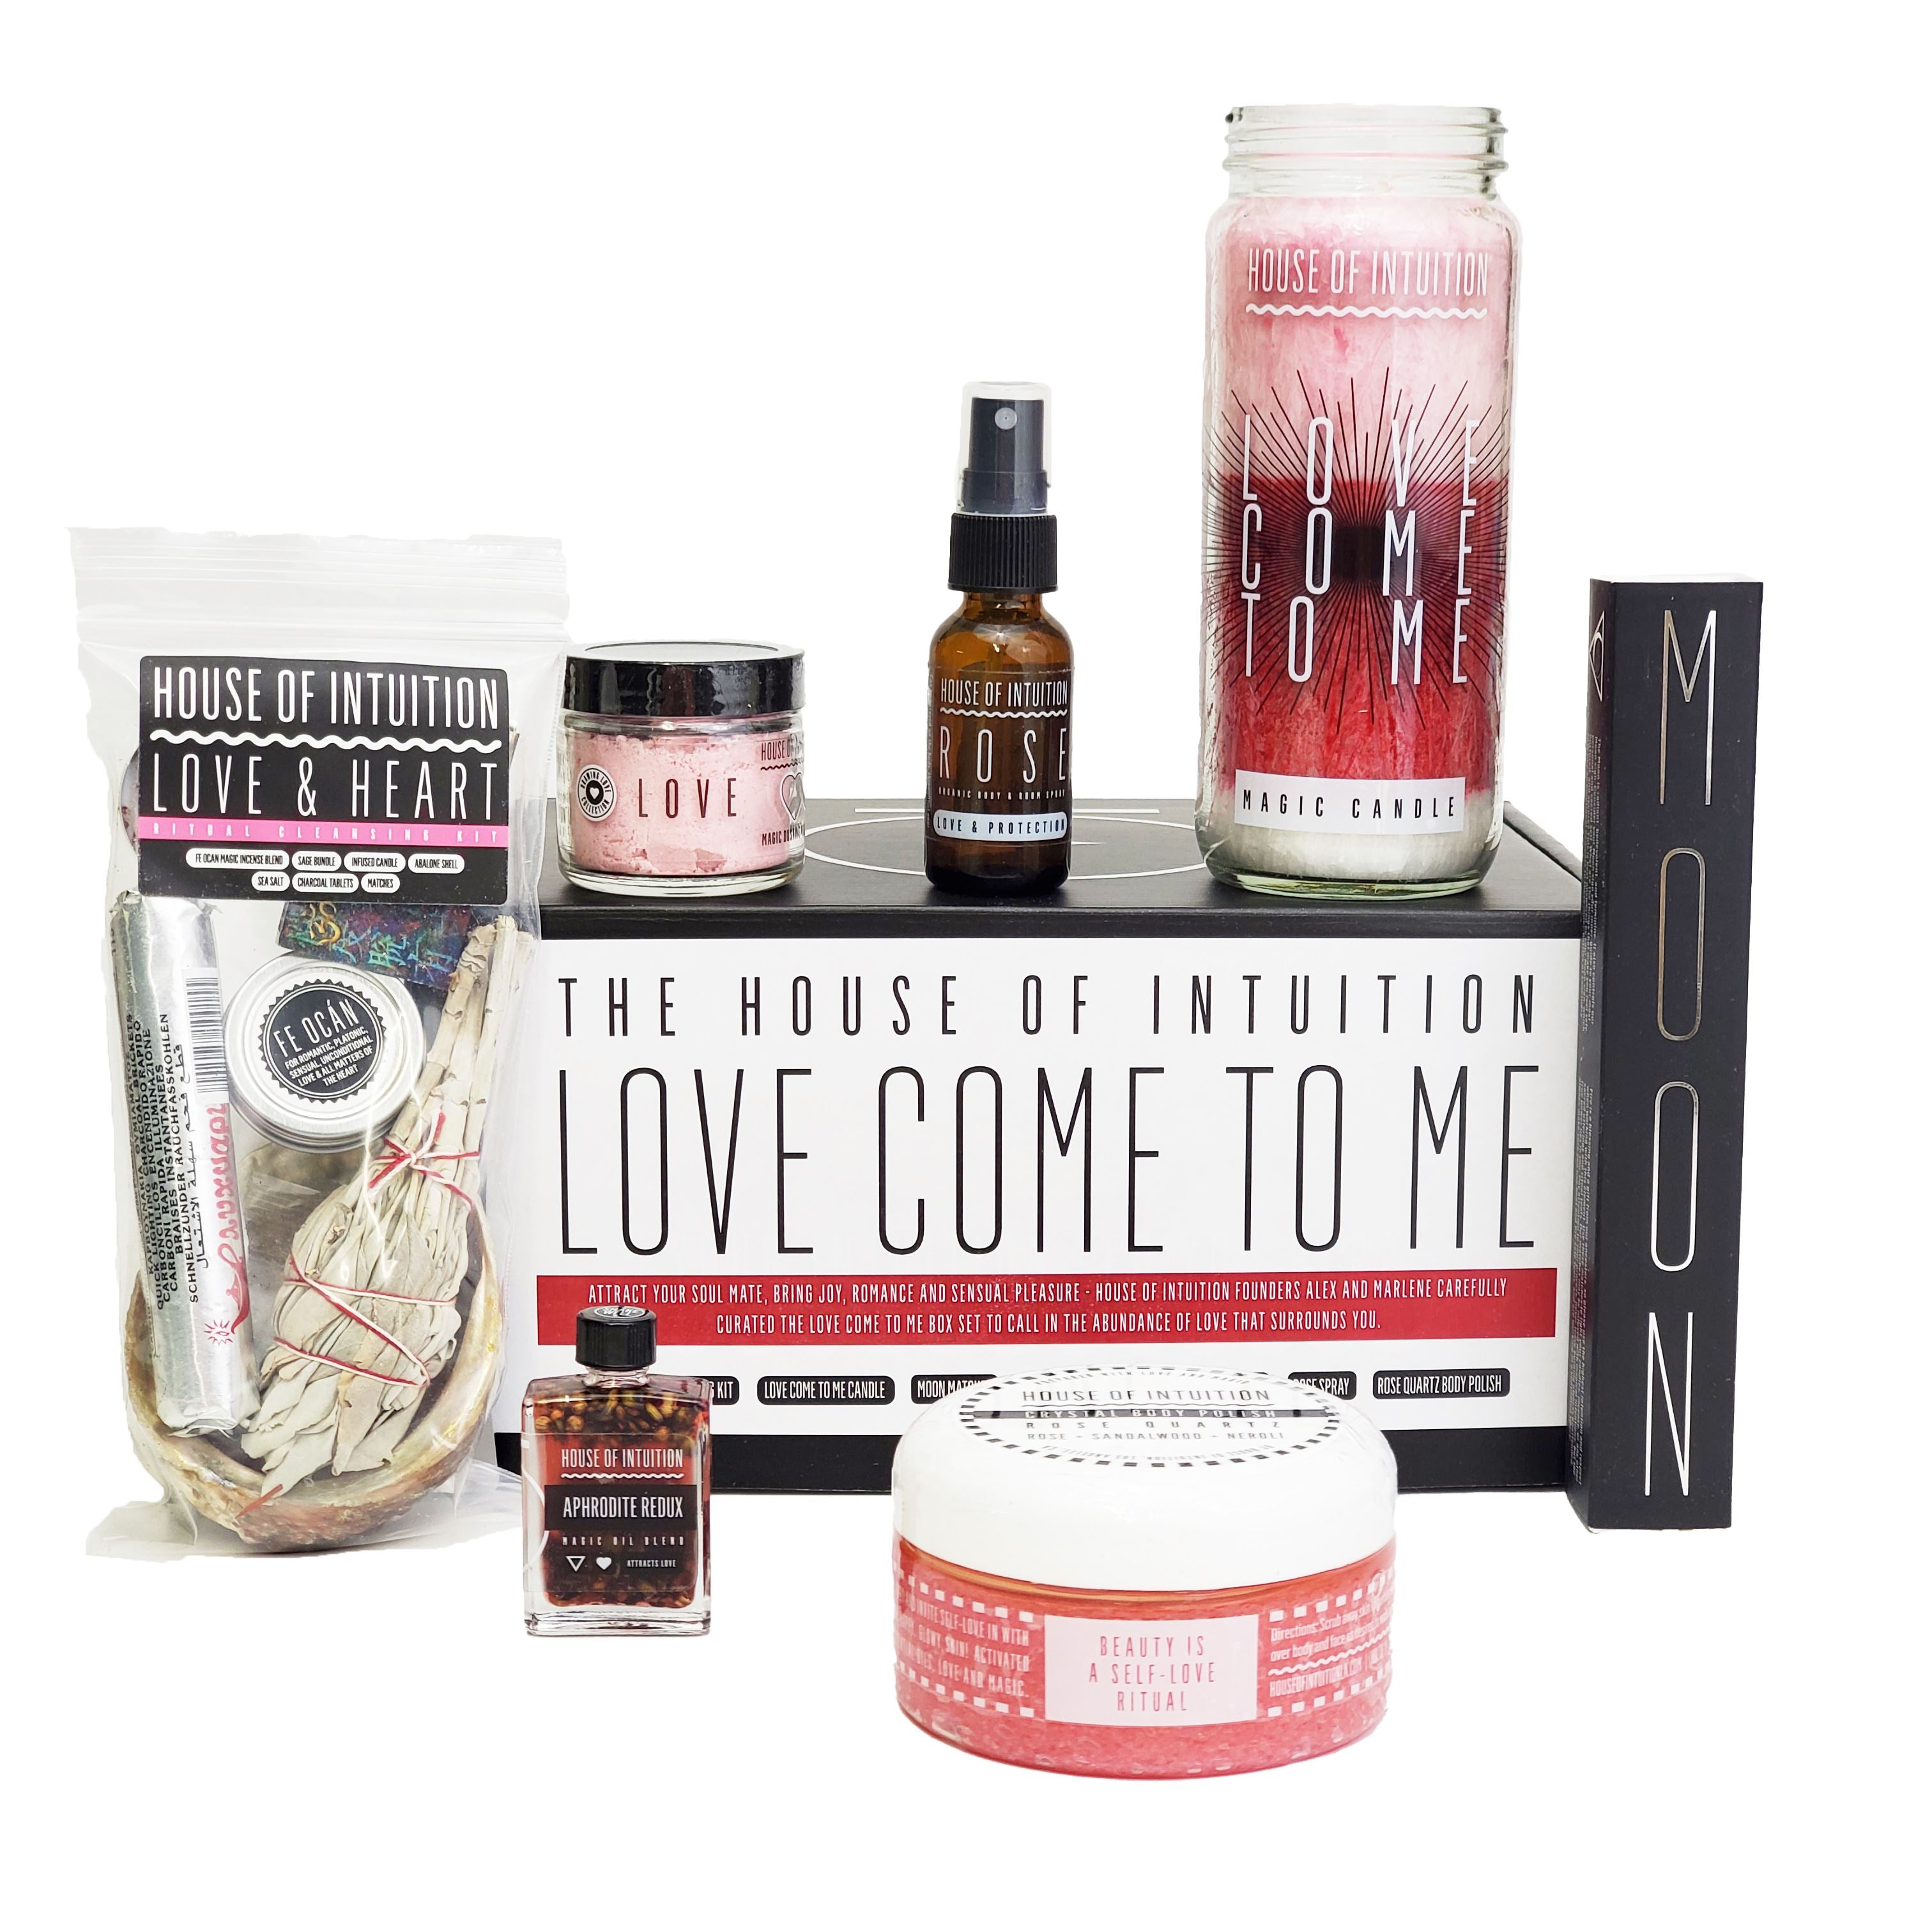 Image of Love Come to Me Box